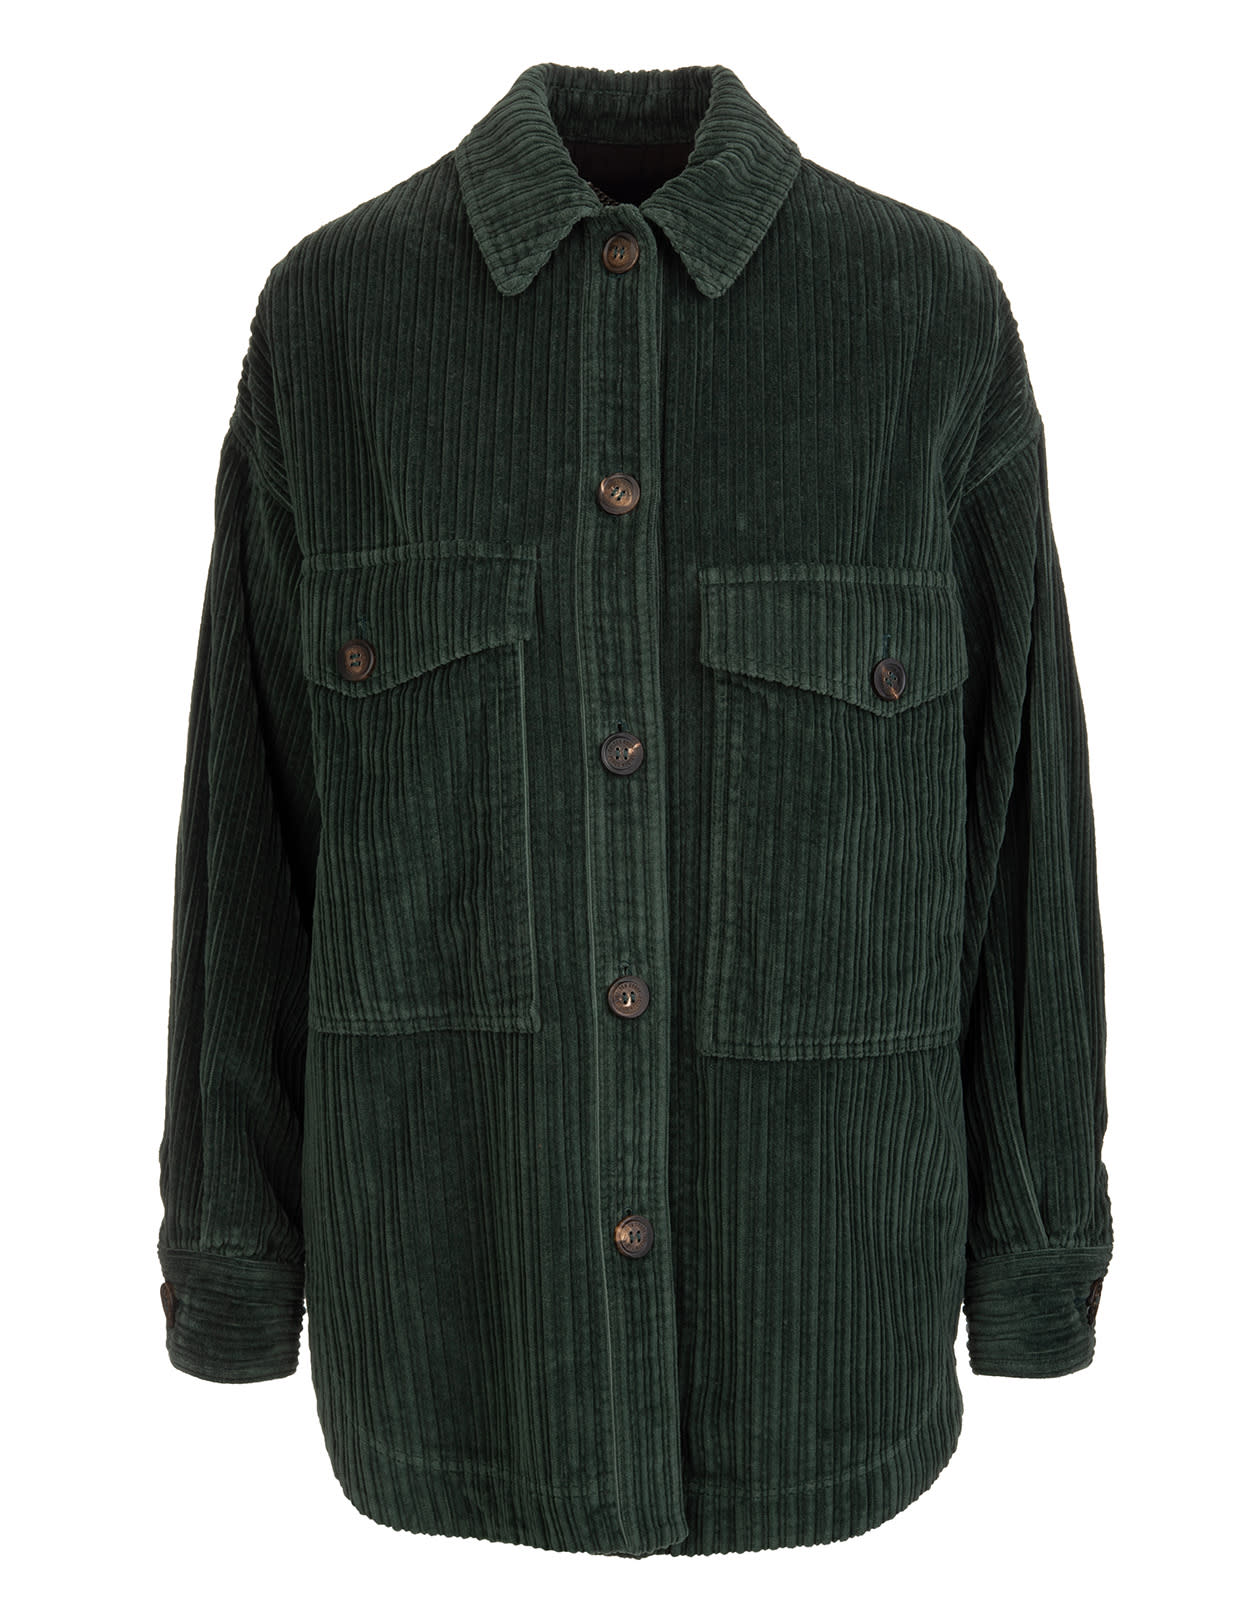 Golden Goose Woman Delicia Overshirt In Forest Green Corduroy